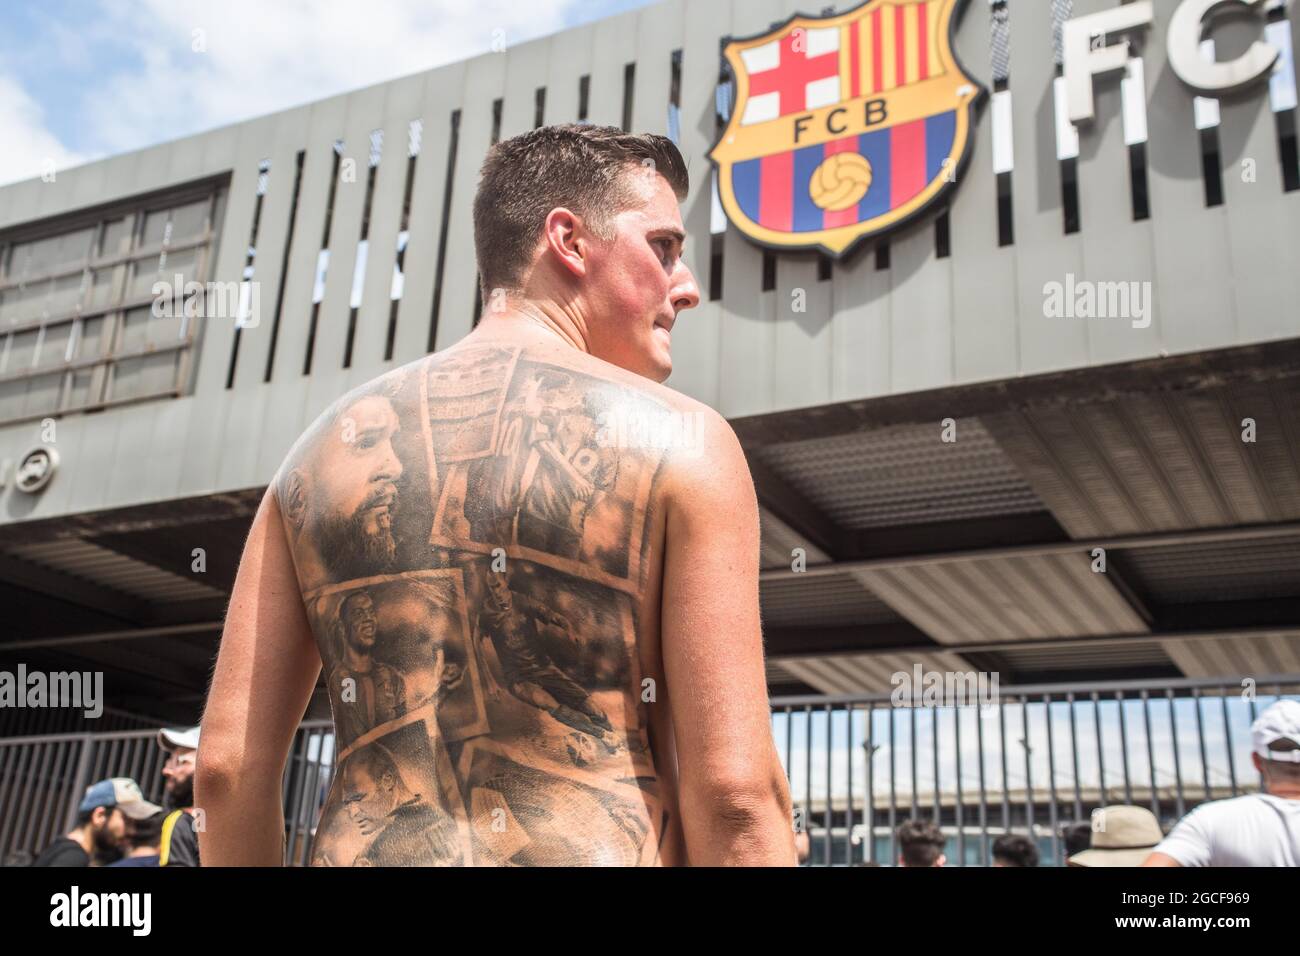 A fan with a tattoo on his back with the face of Messi and other ...